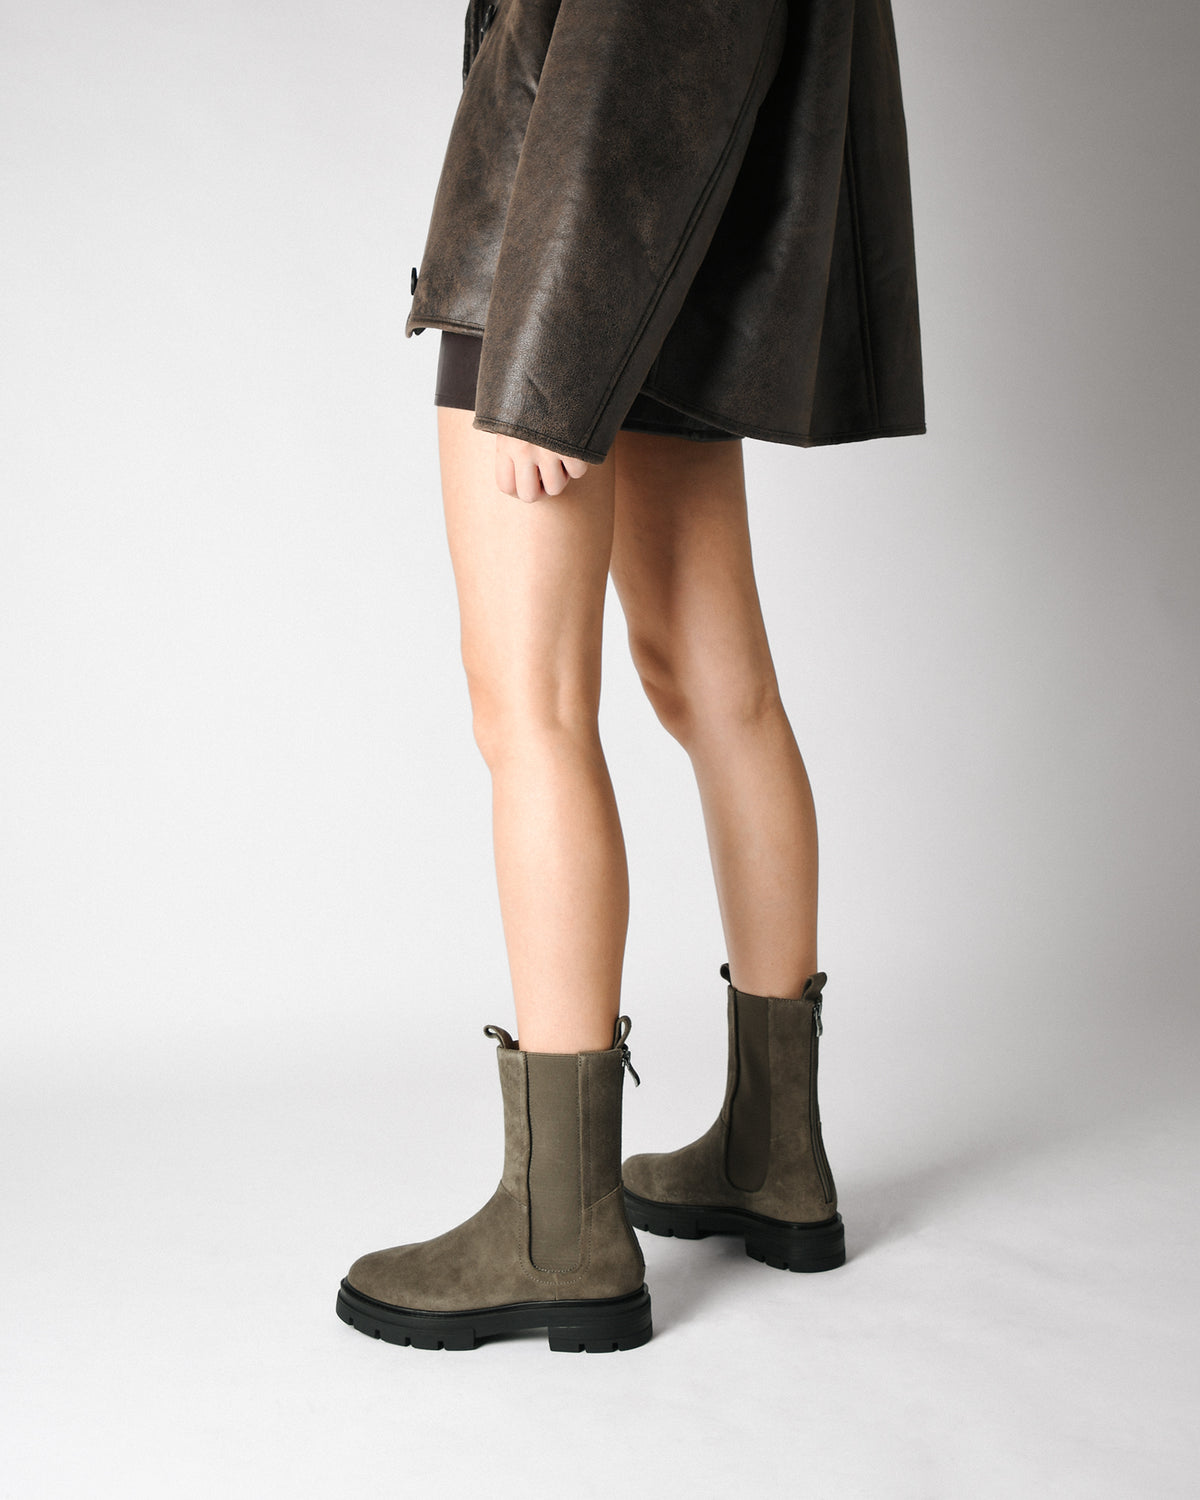 BRAXTON FLAT ANKLE BOOTS KHAKI SUEDE